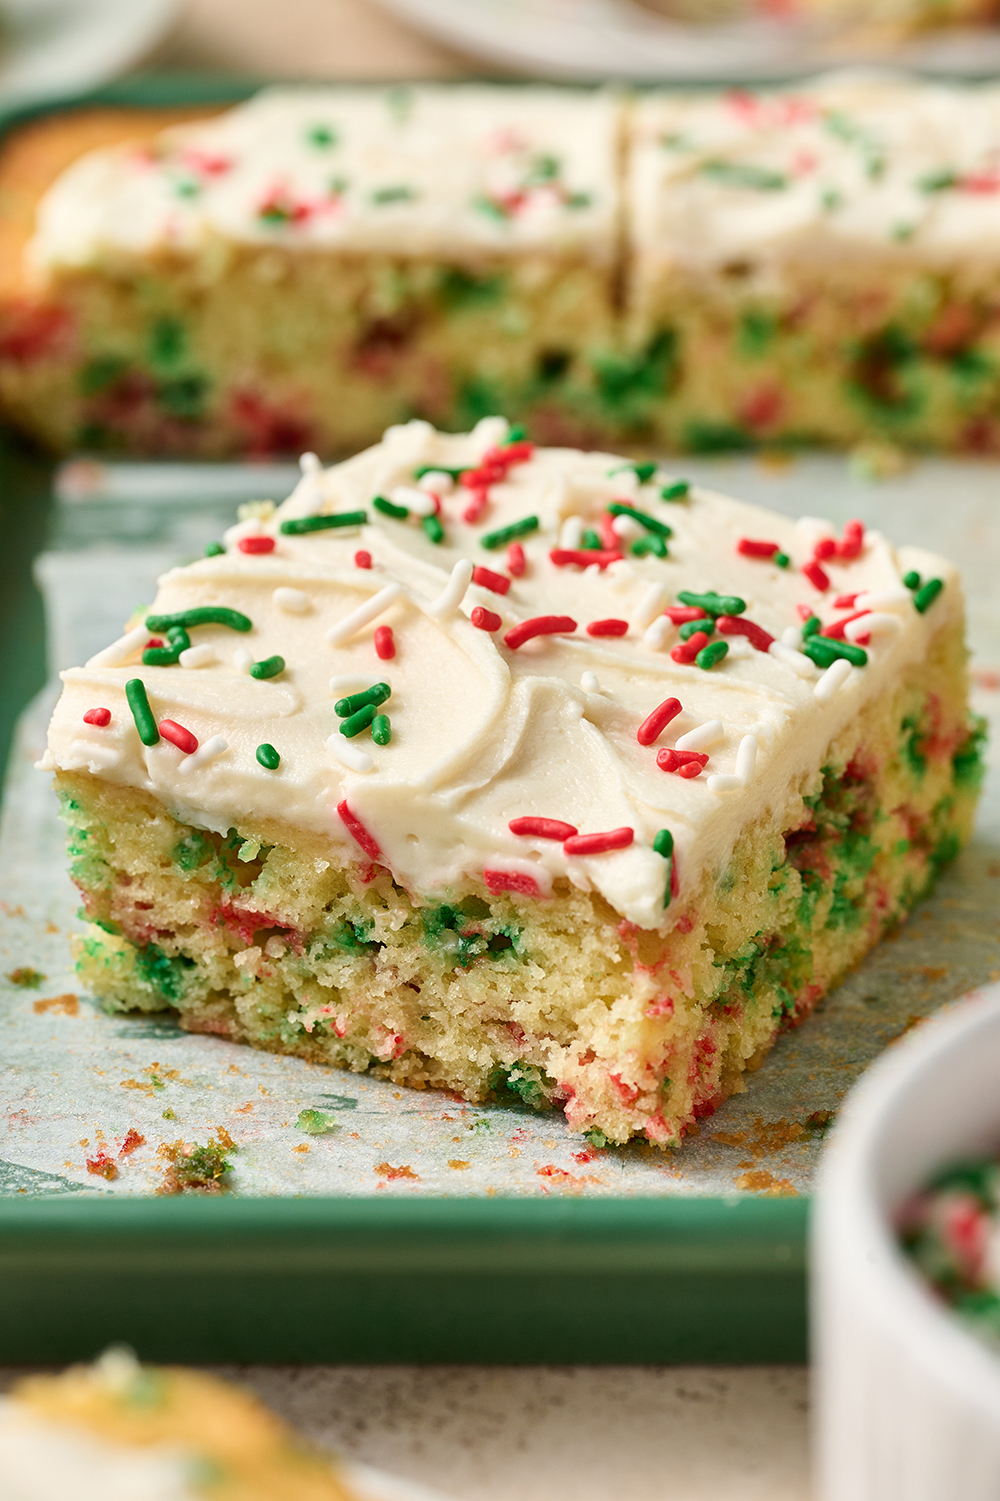 the cake in the background is all sliced up, with one slice close to the front, frosted and topped with holiday sprinkles.